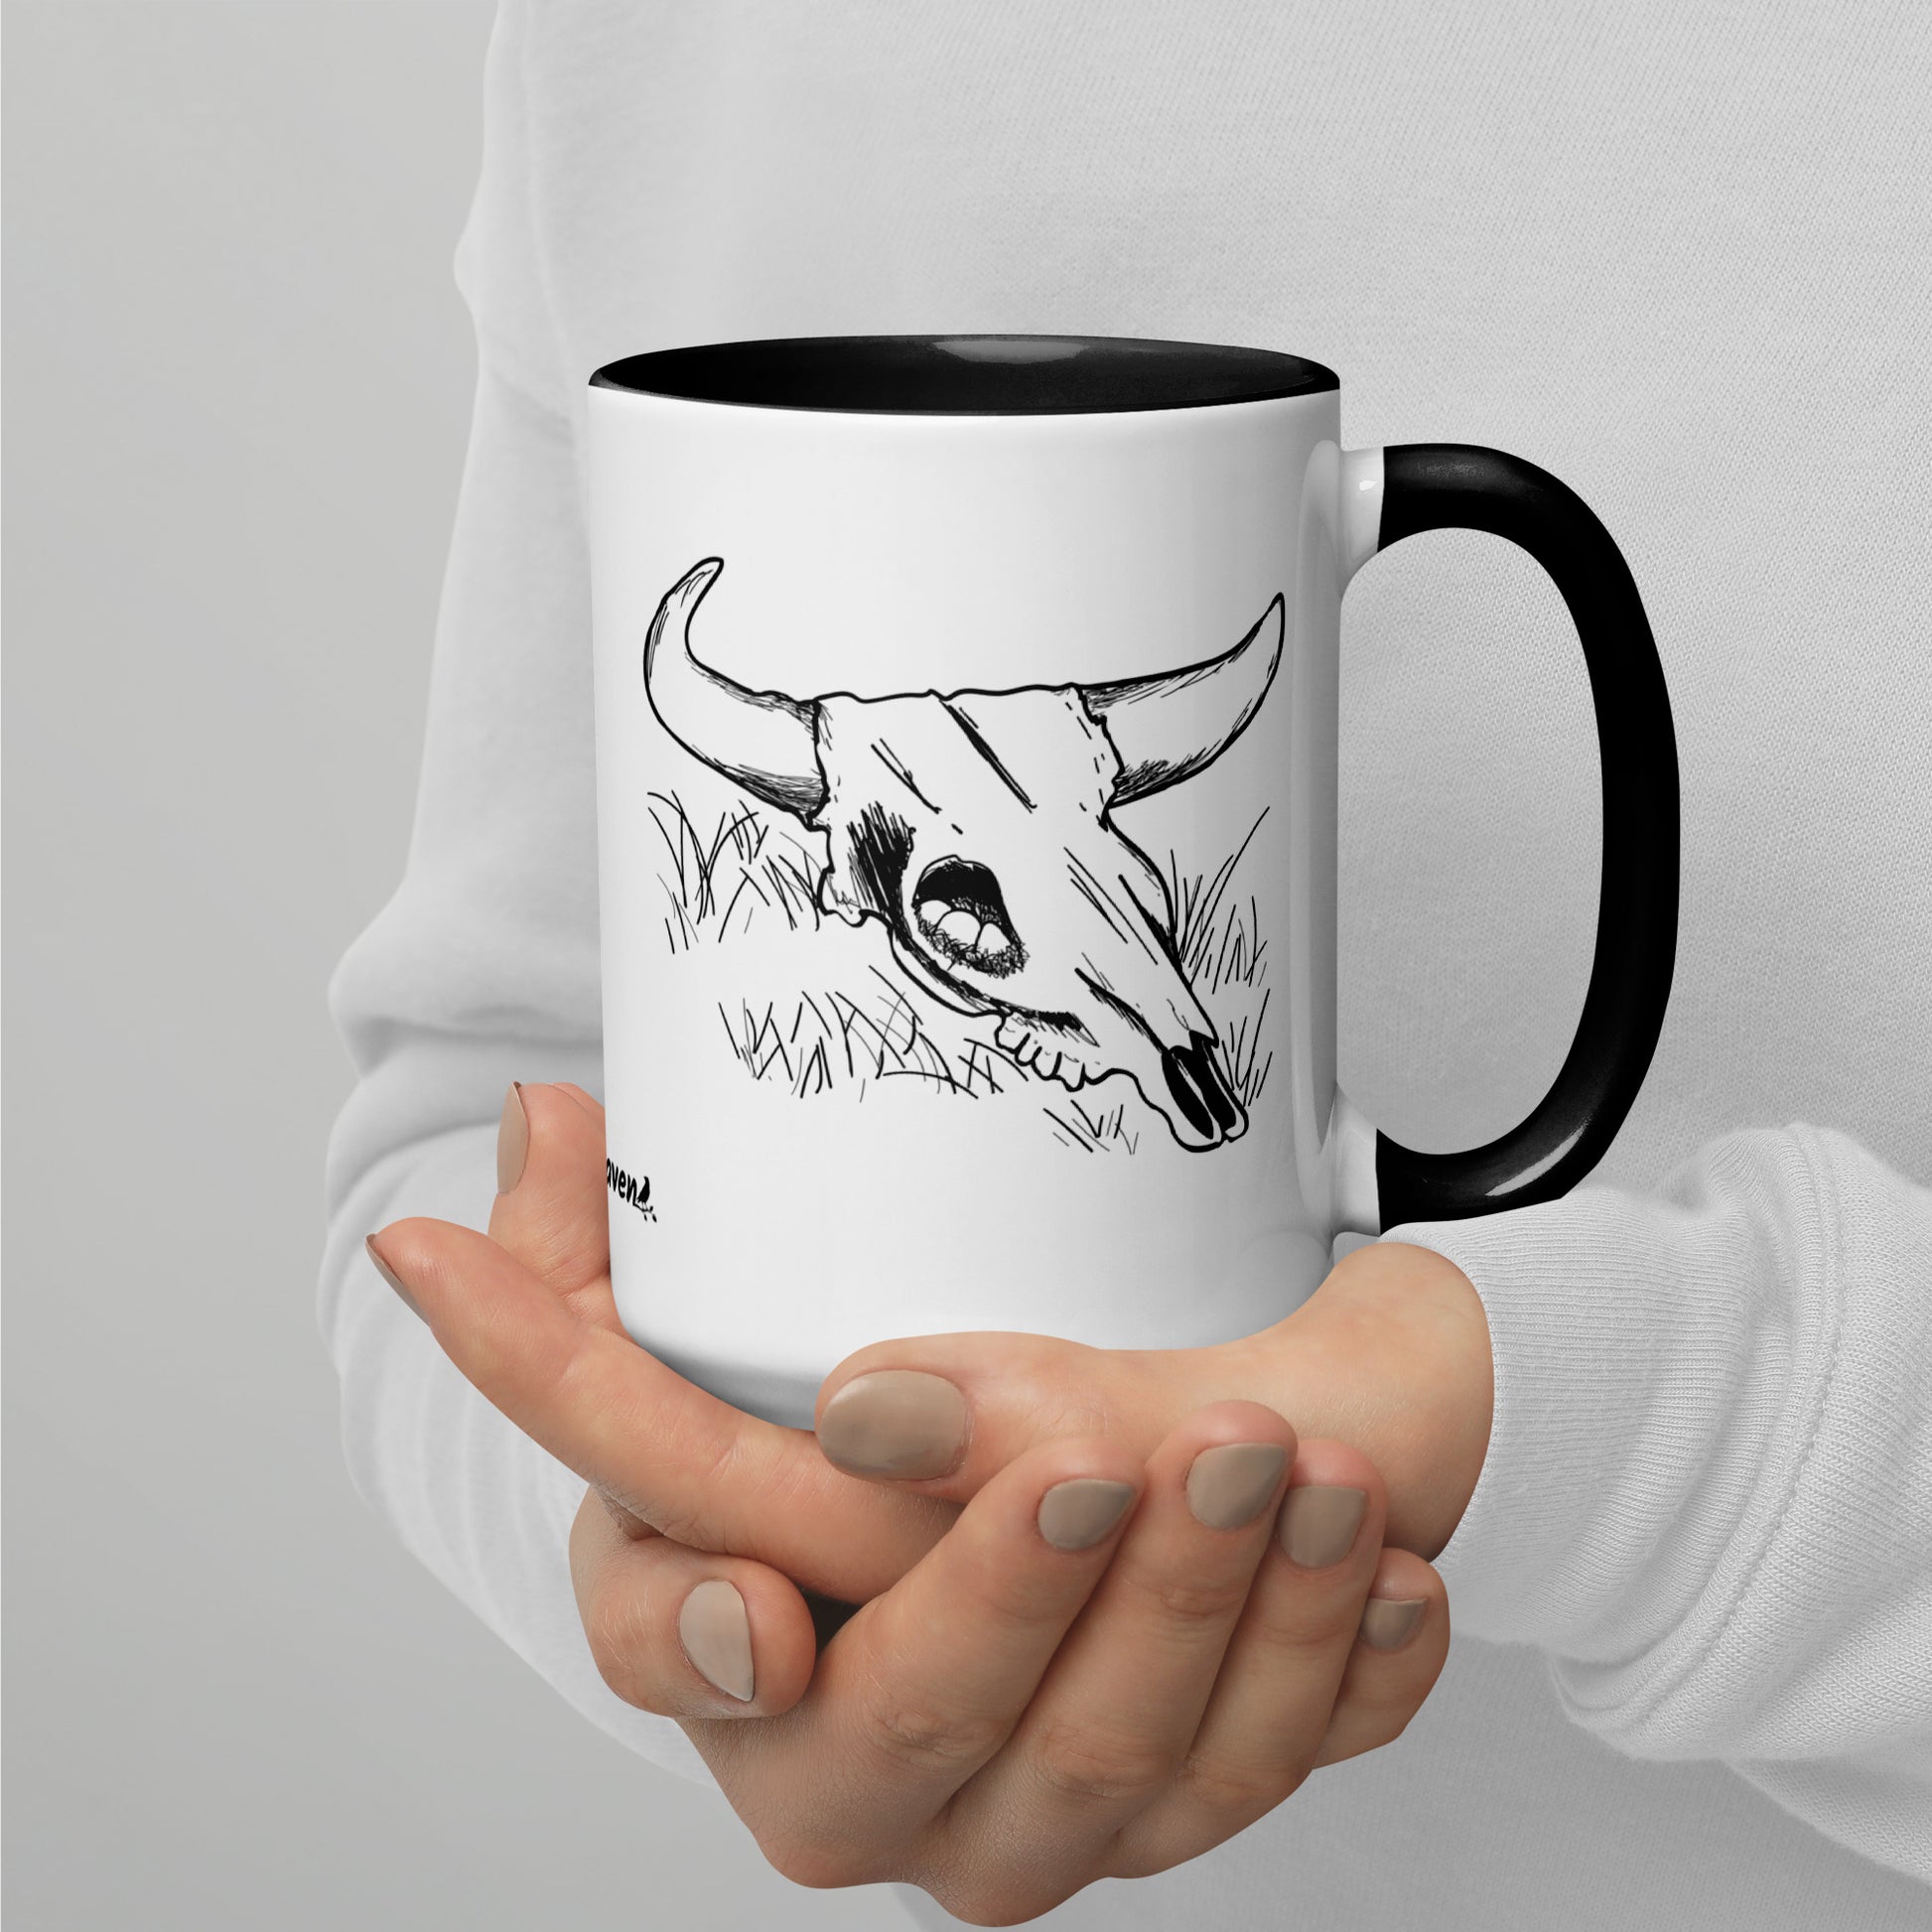 15 ounce ceramic mug. White with black handle and inside. Features double sided image of a cow skull cradling a bird nest. Shown in model's hand.